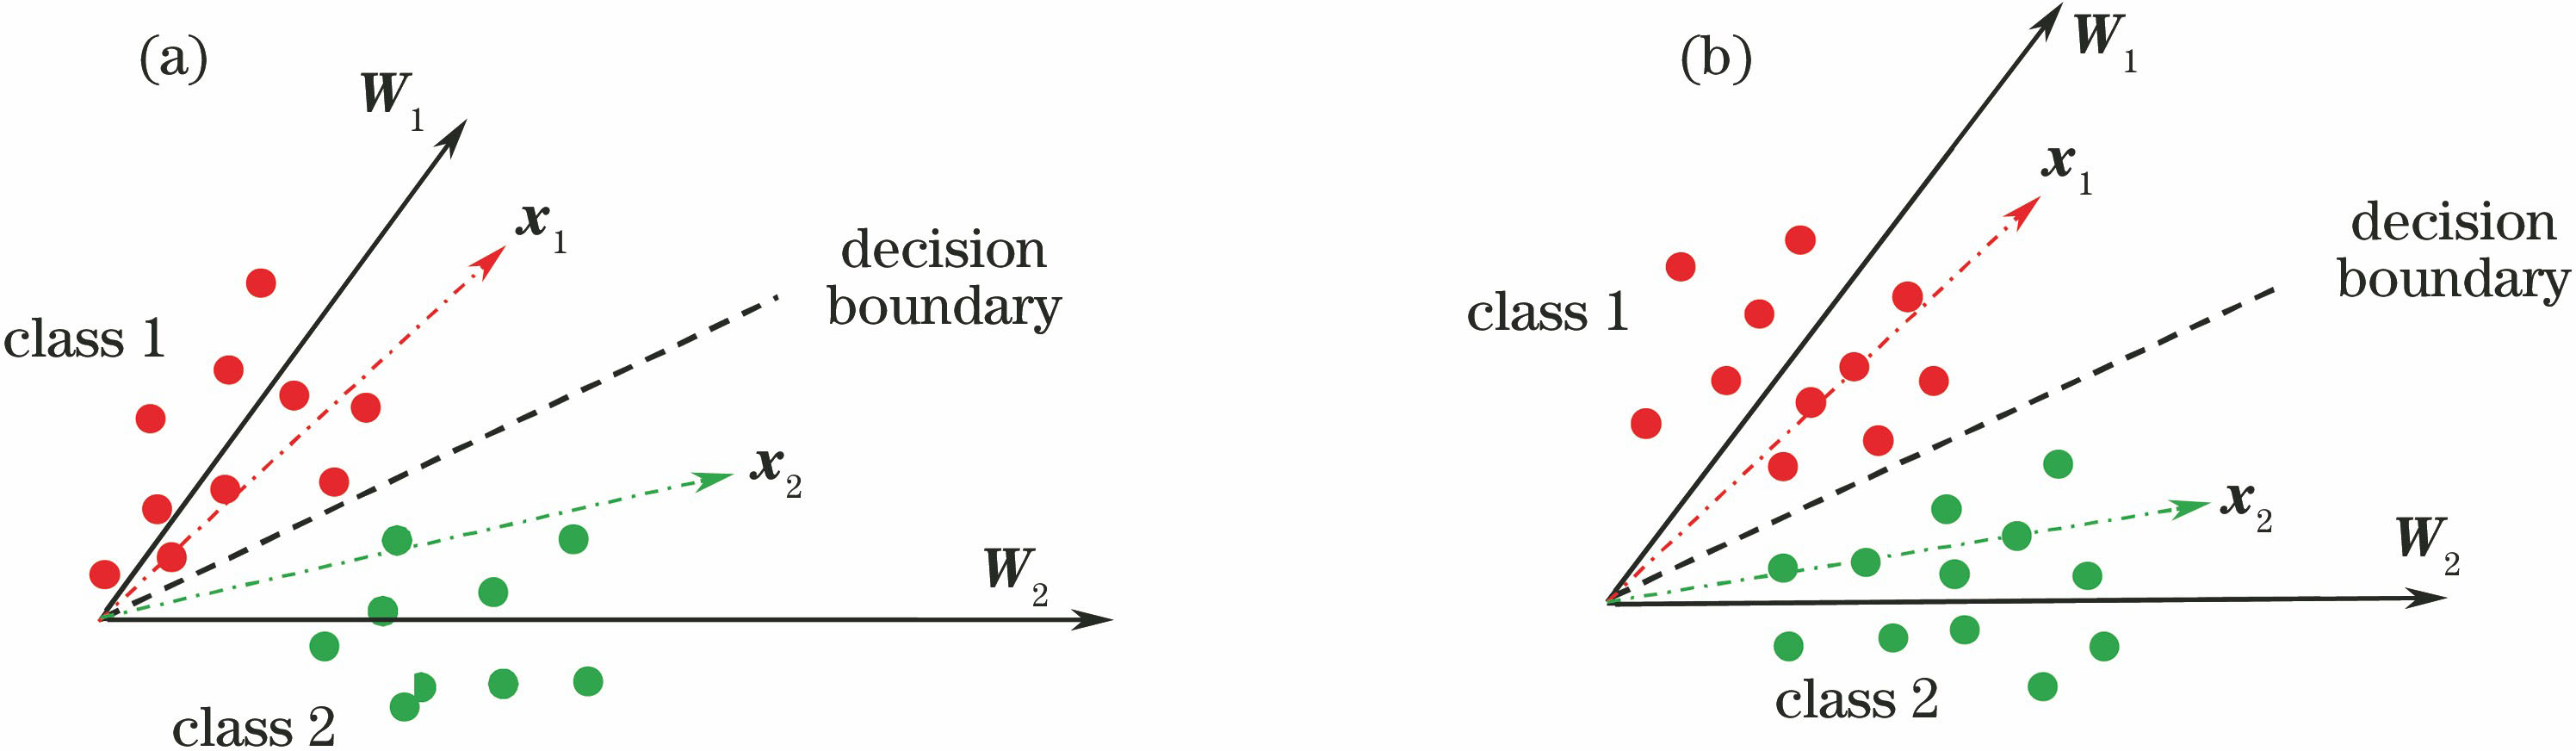 Comparison of softmax loss function. (a) Traditional softmax loss function; (b) improved softmax loss function